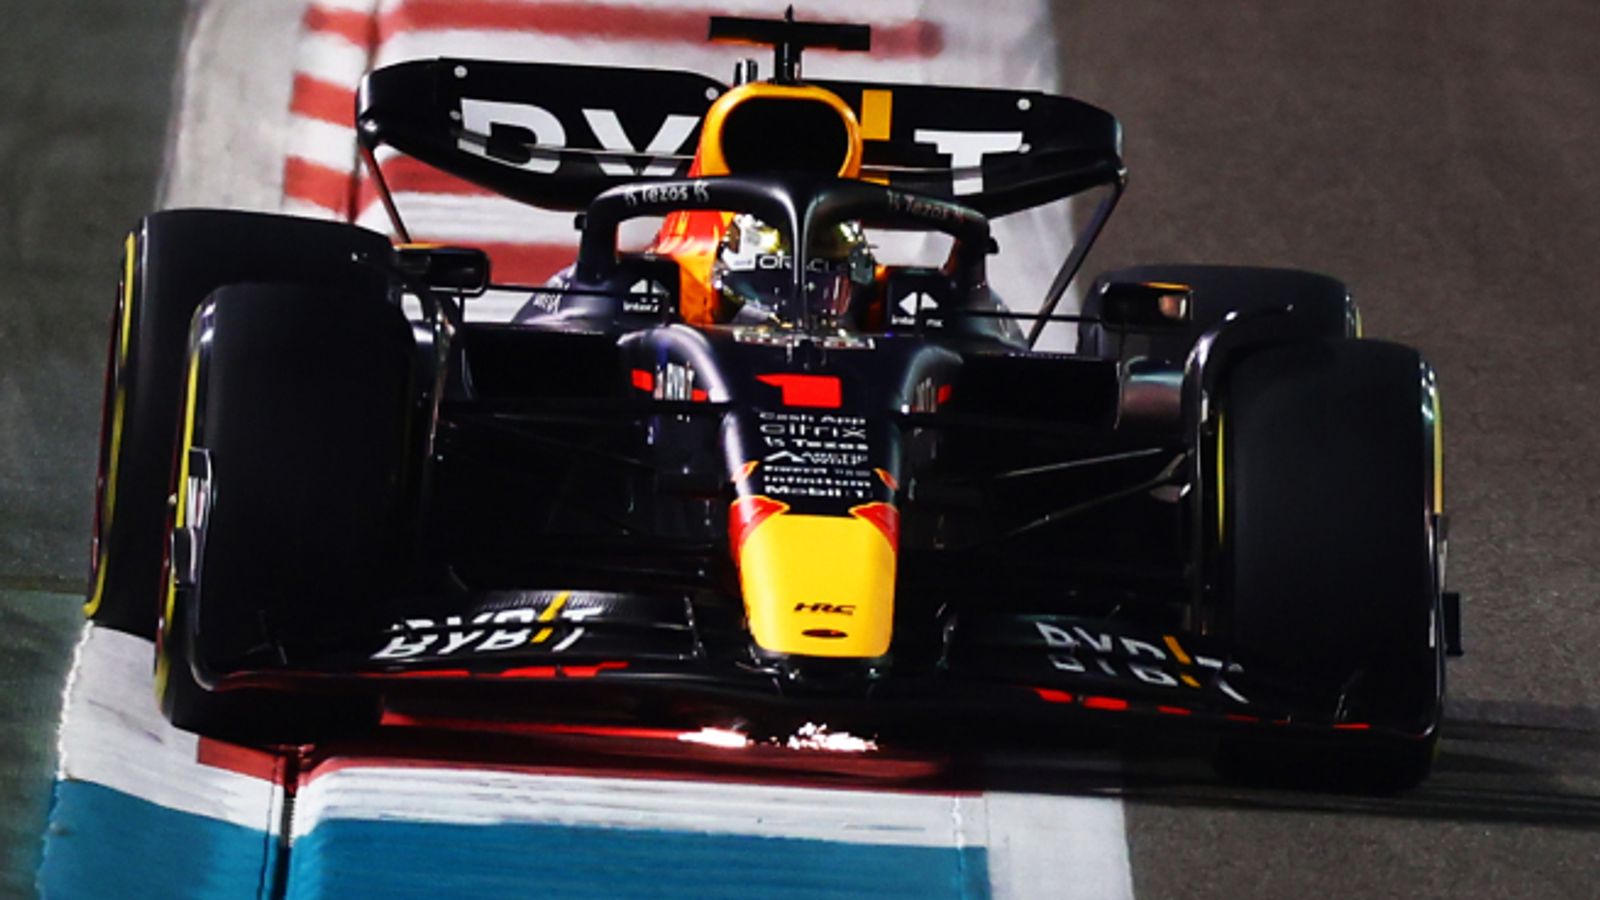 Abu Dhabi Grand Prix: Max Verstappen tops George Russell in Practice Two as world champion halts Mercedes’ flying start